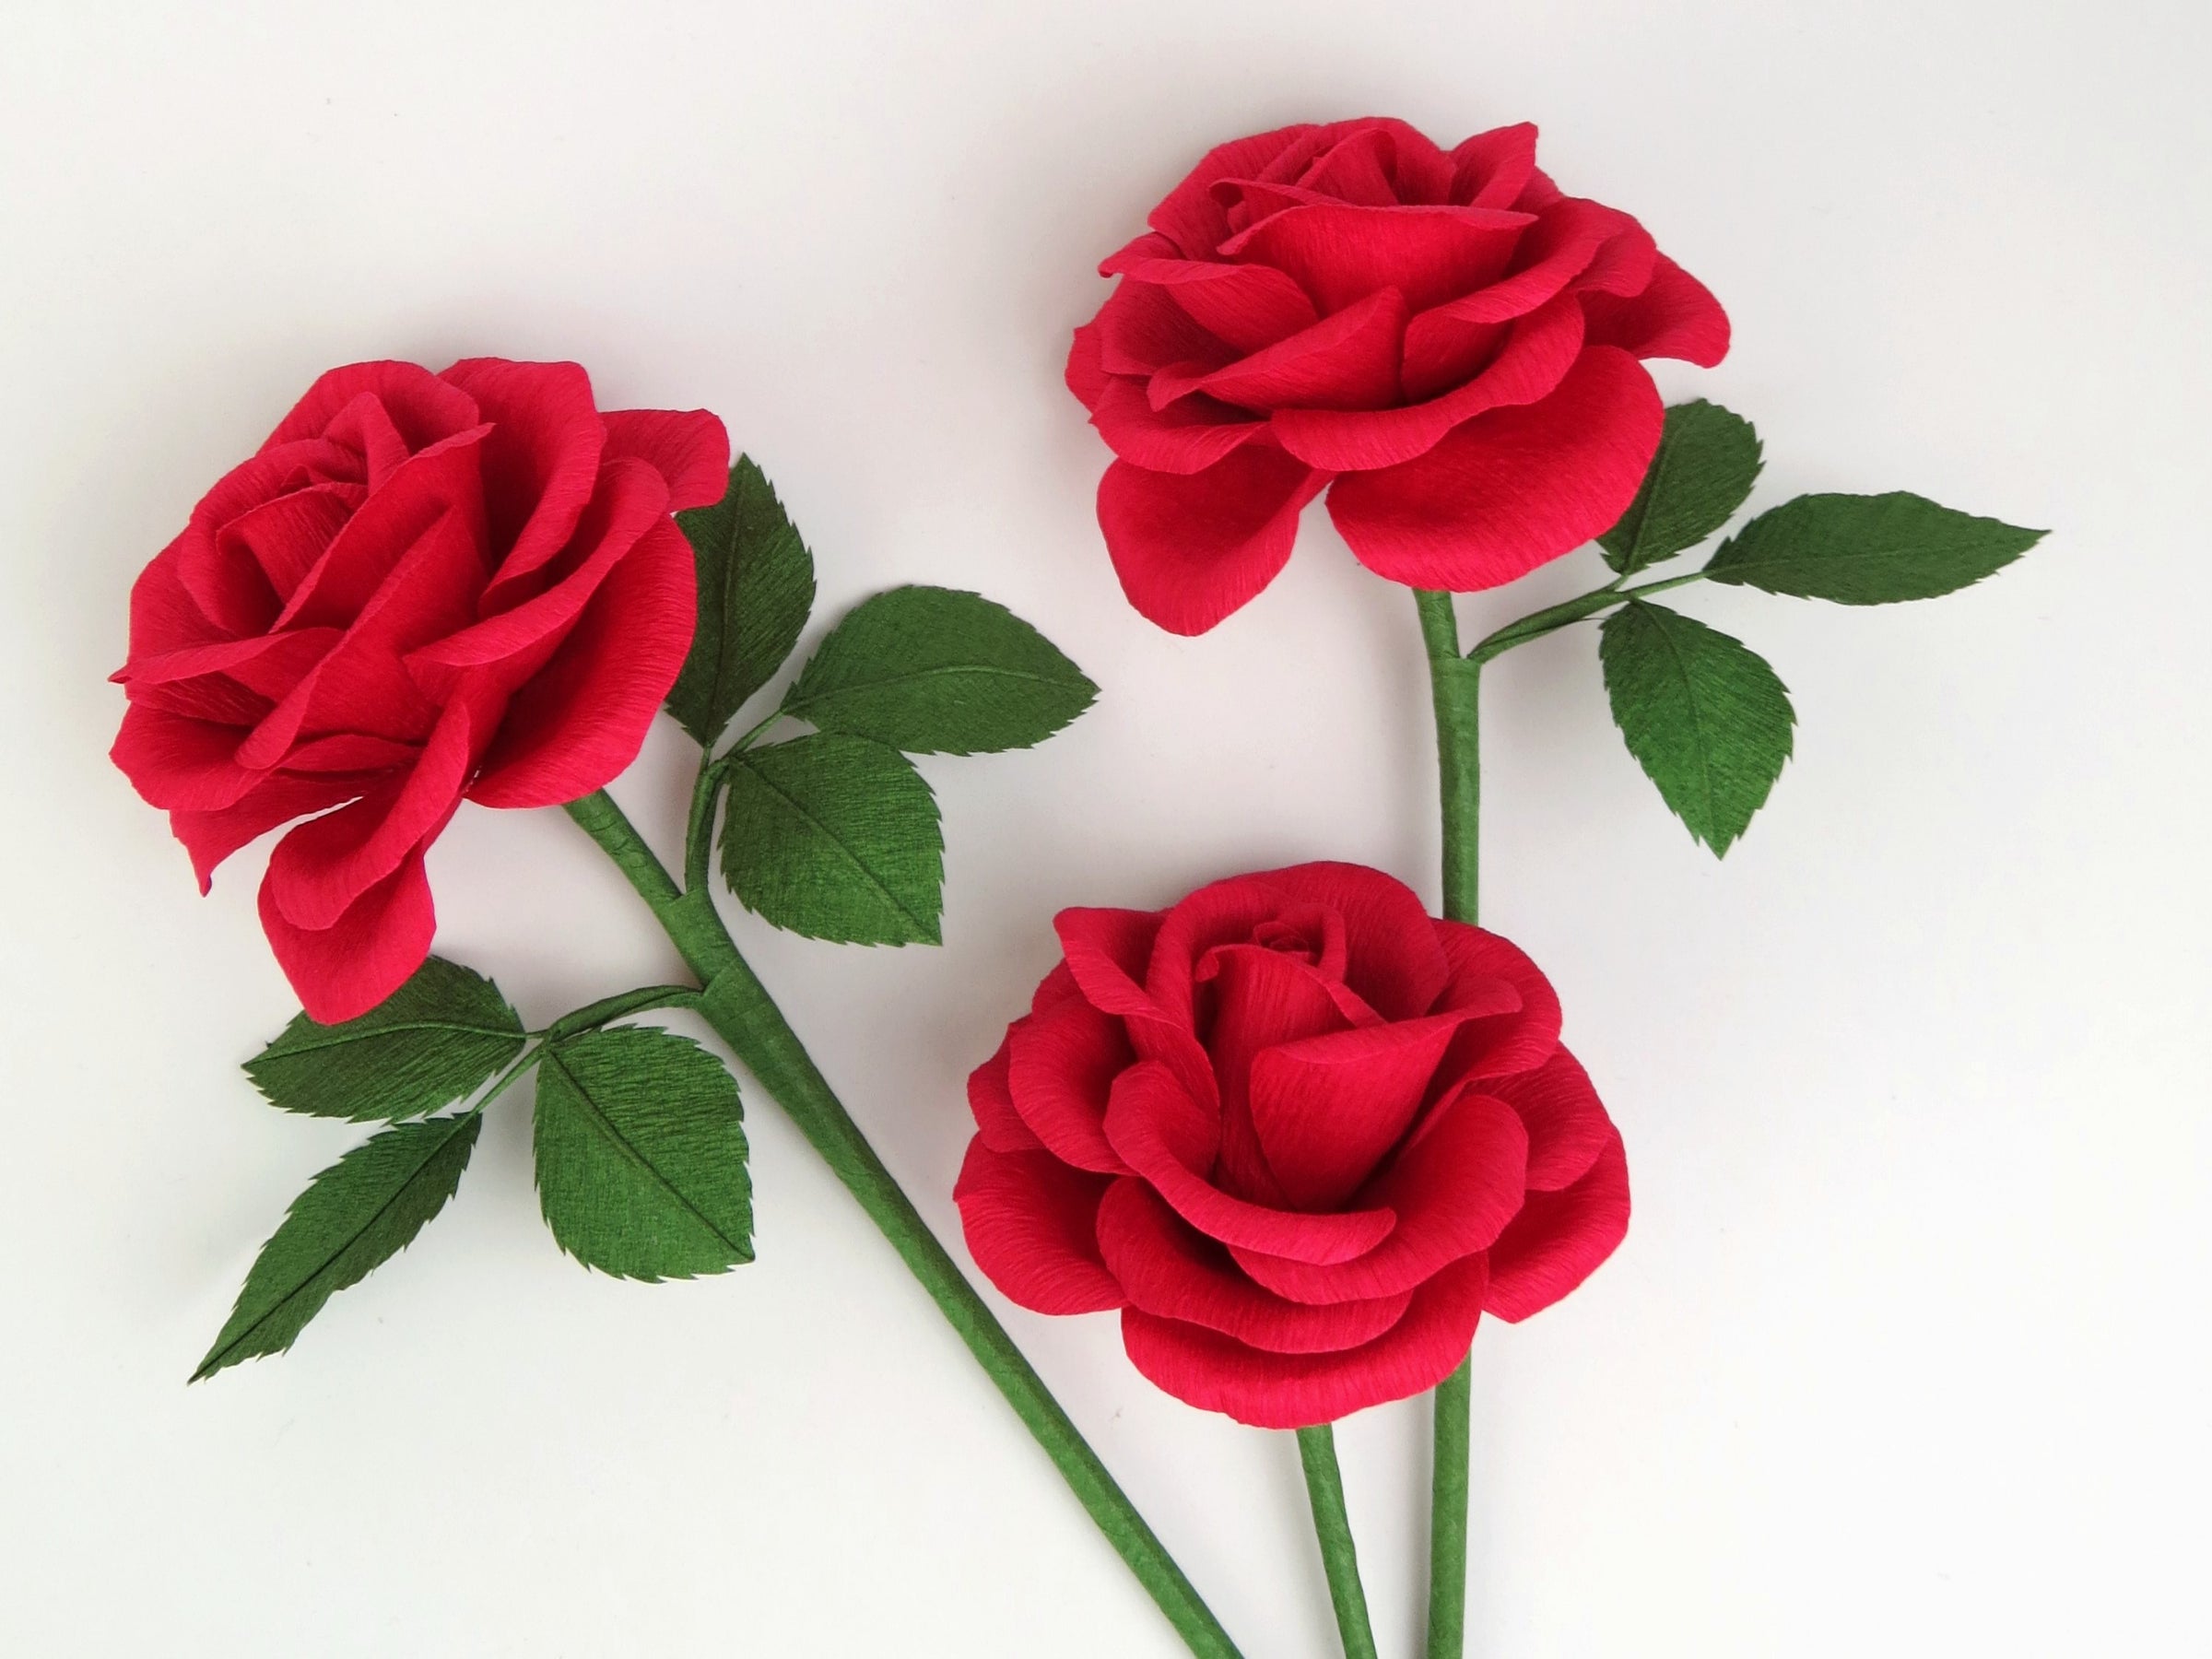 Three red paper roses randomly lying next to each other on a white background. The left rose has six green leaves attached, the middle rose has no leaves and the right rose has three leaves.